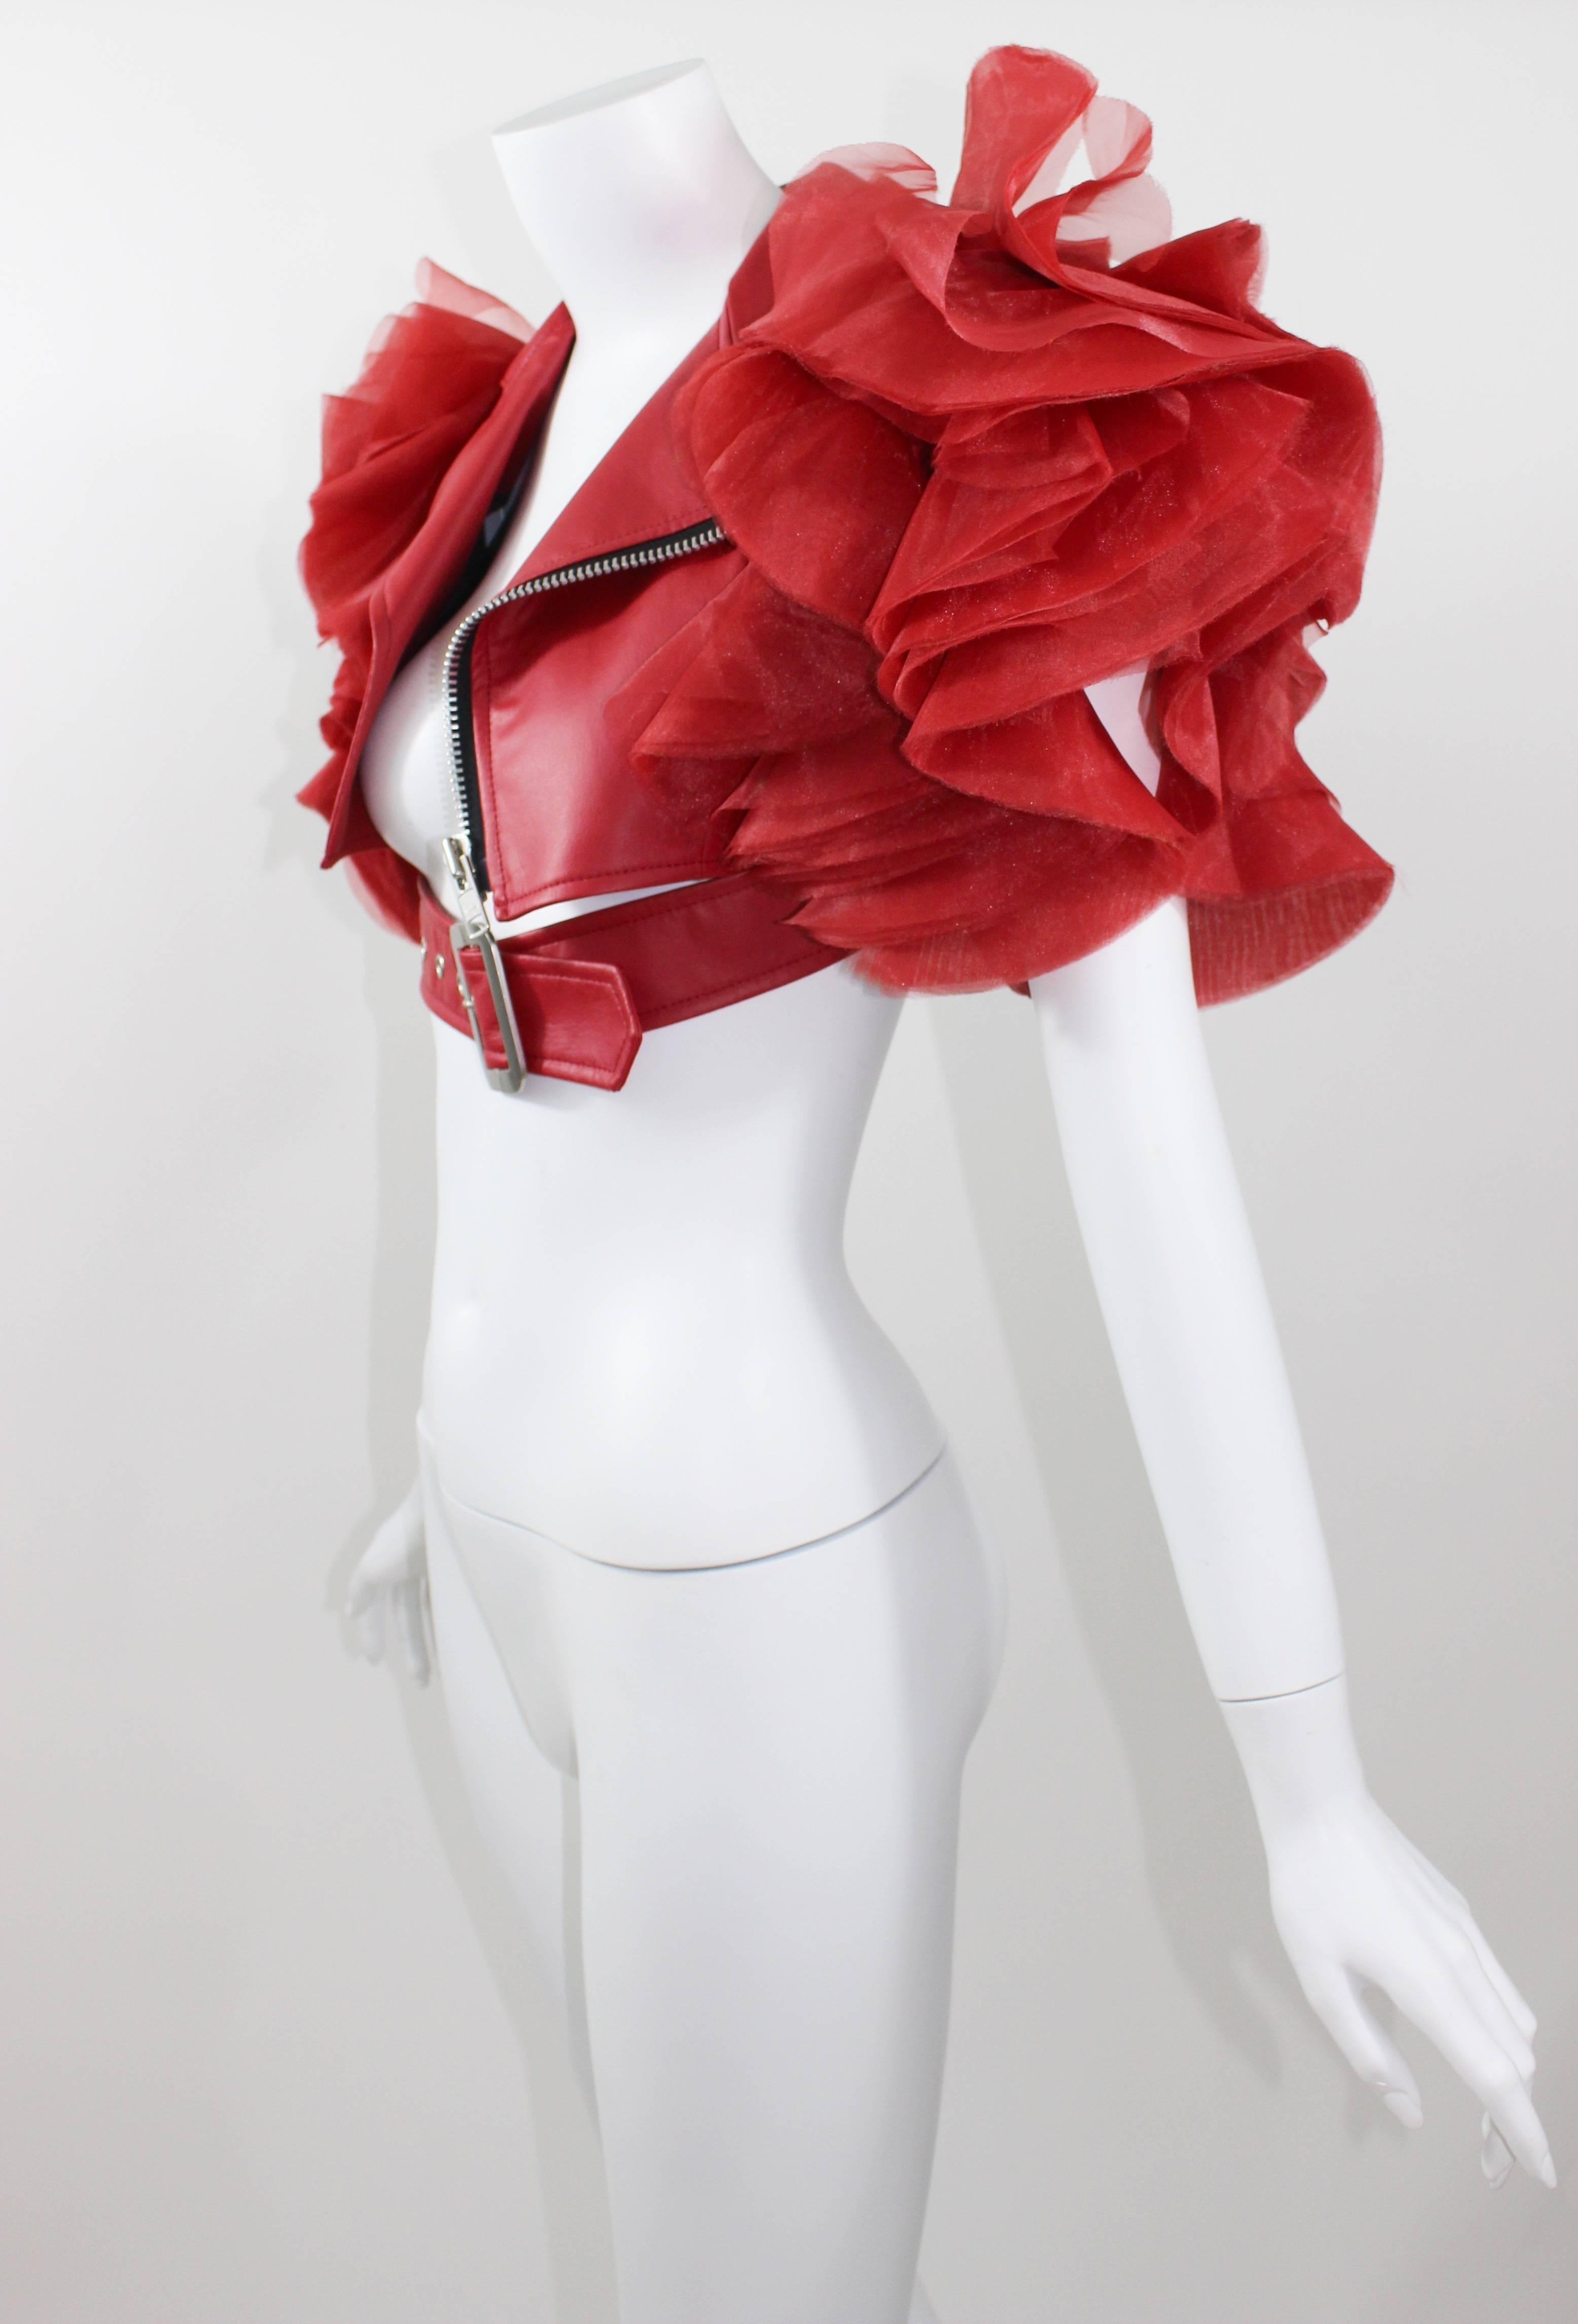 2012 Junya Watanabe Comme Des Garcons Red Faux Leather Ruffle Cropped Jacket 1